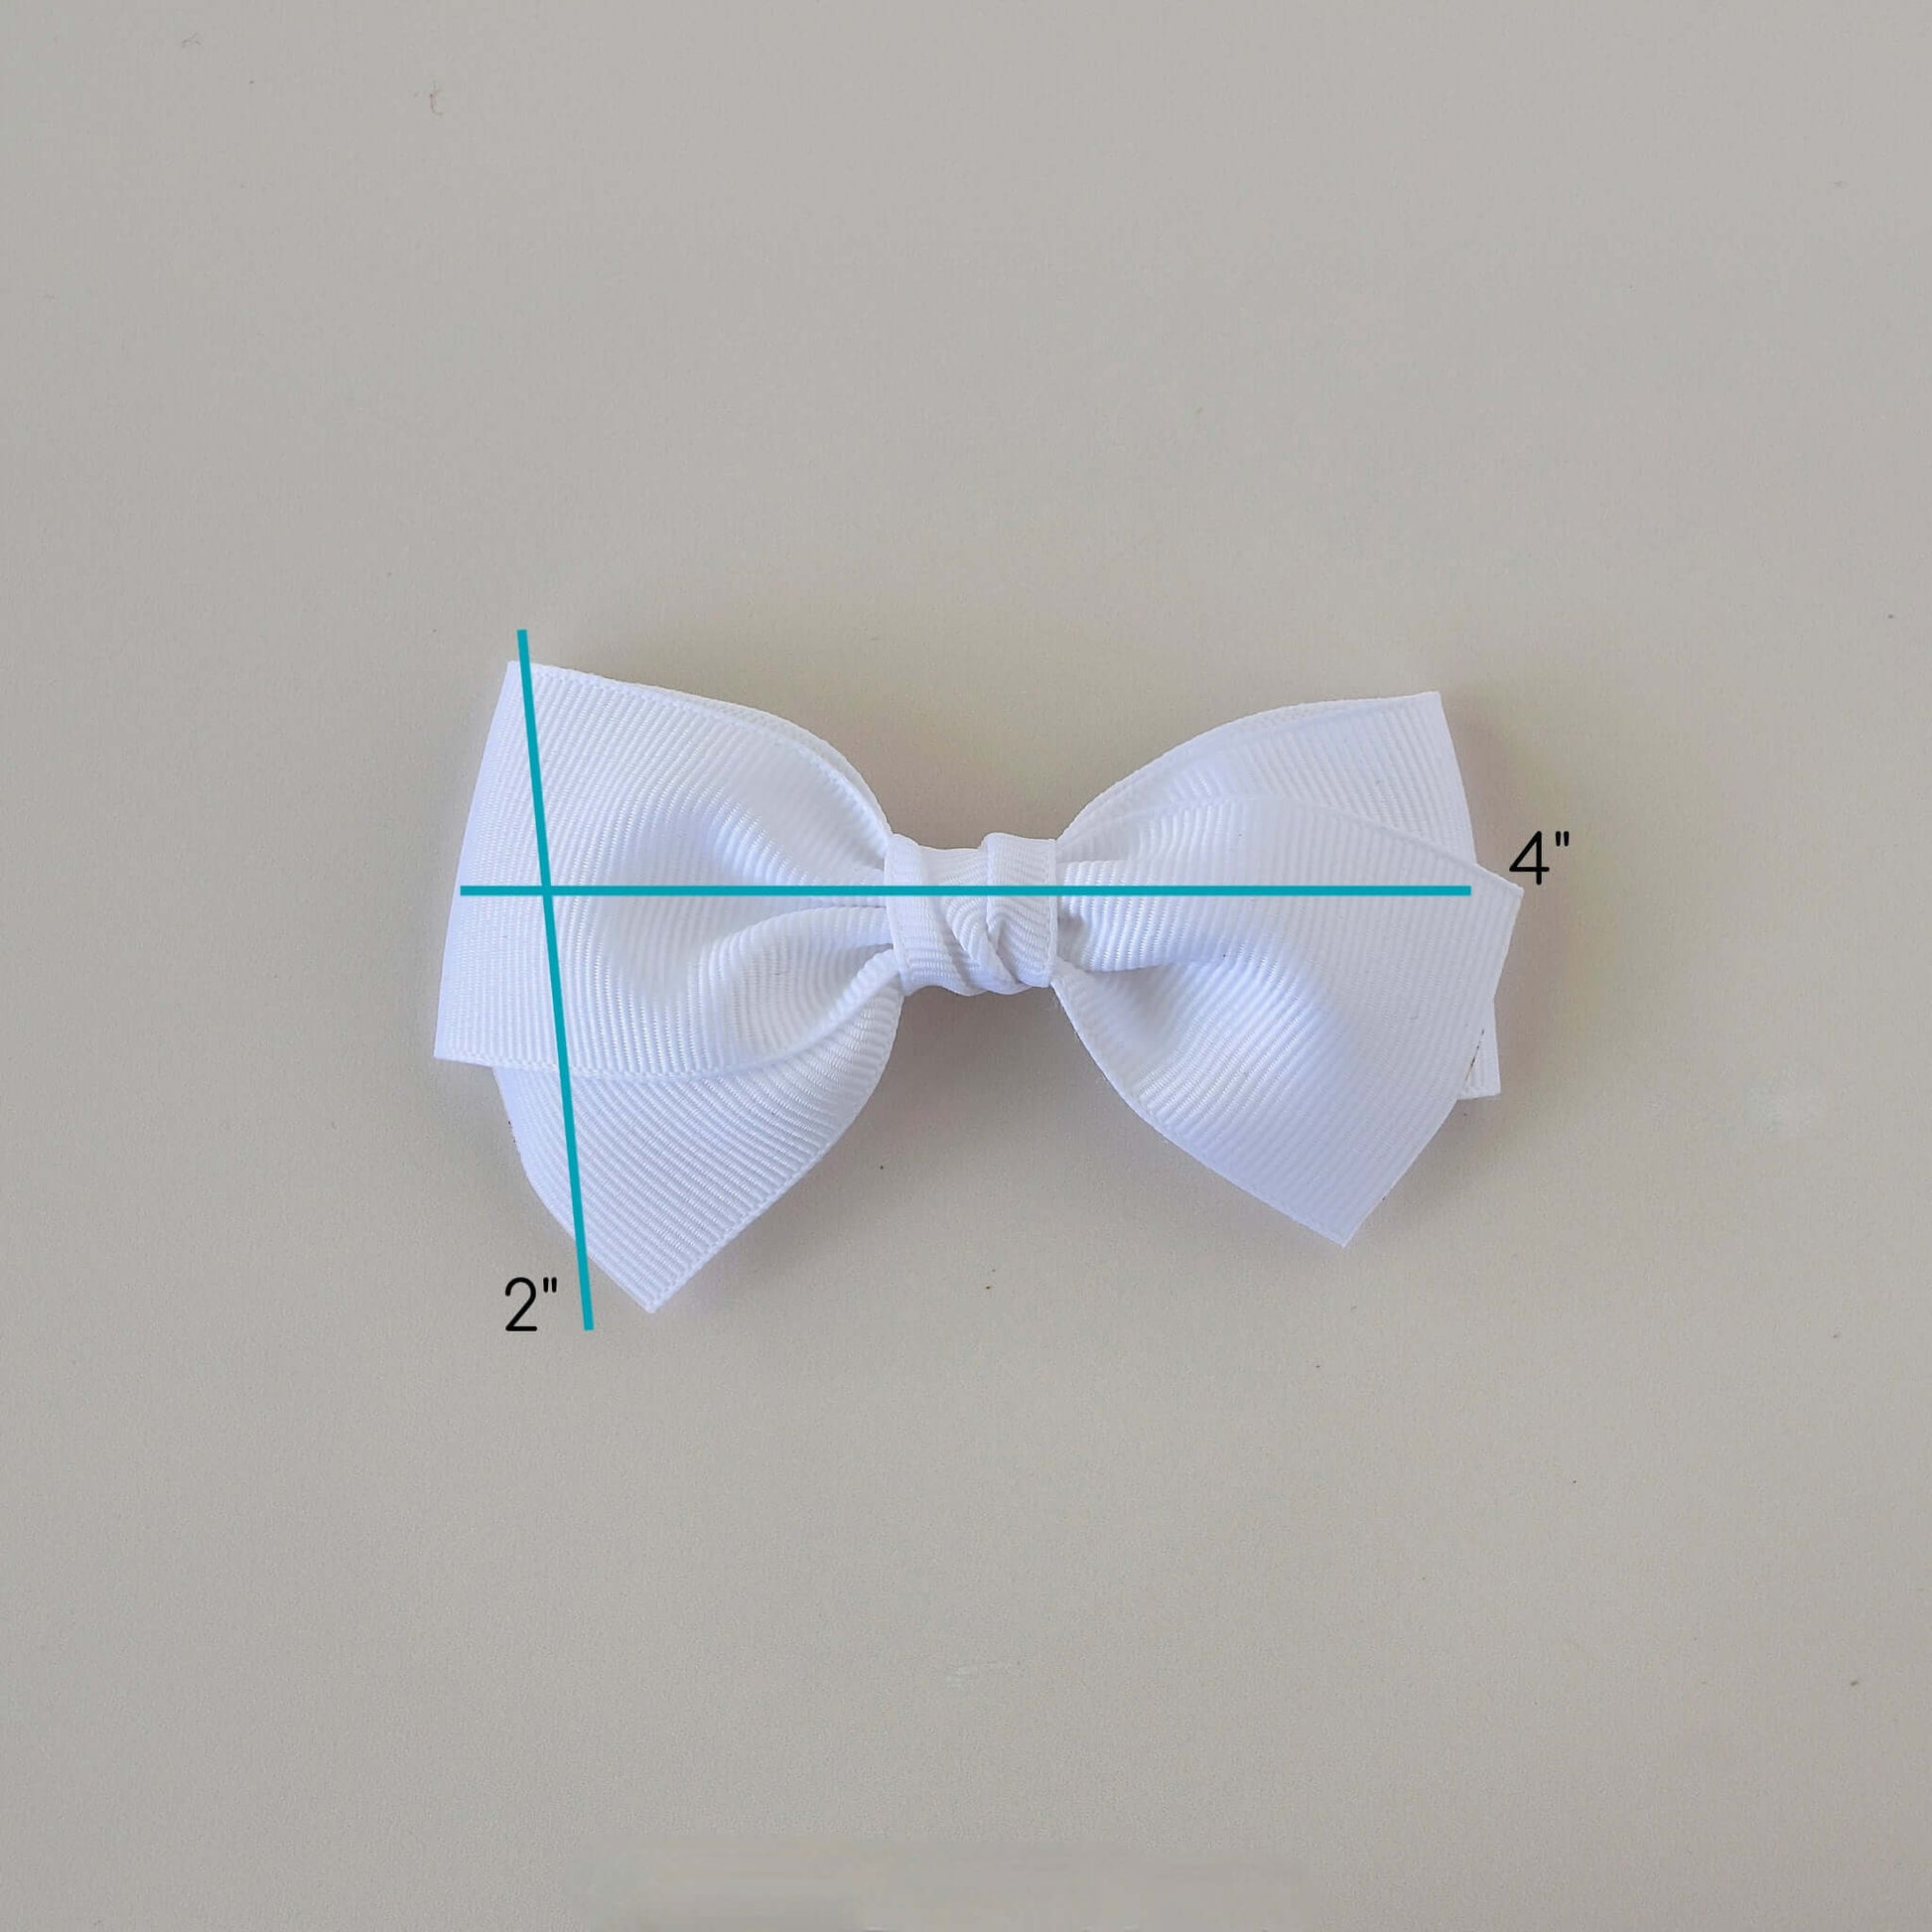 4 inch white grosgrain baby Kayla bow clip showing dimensions, perfect for toddlers and newborns, versatile accessory for headbands or clips